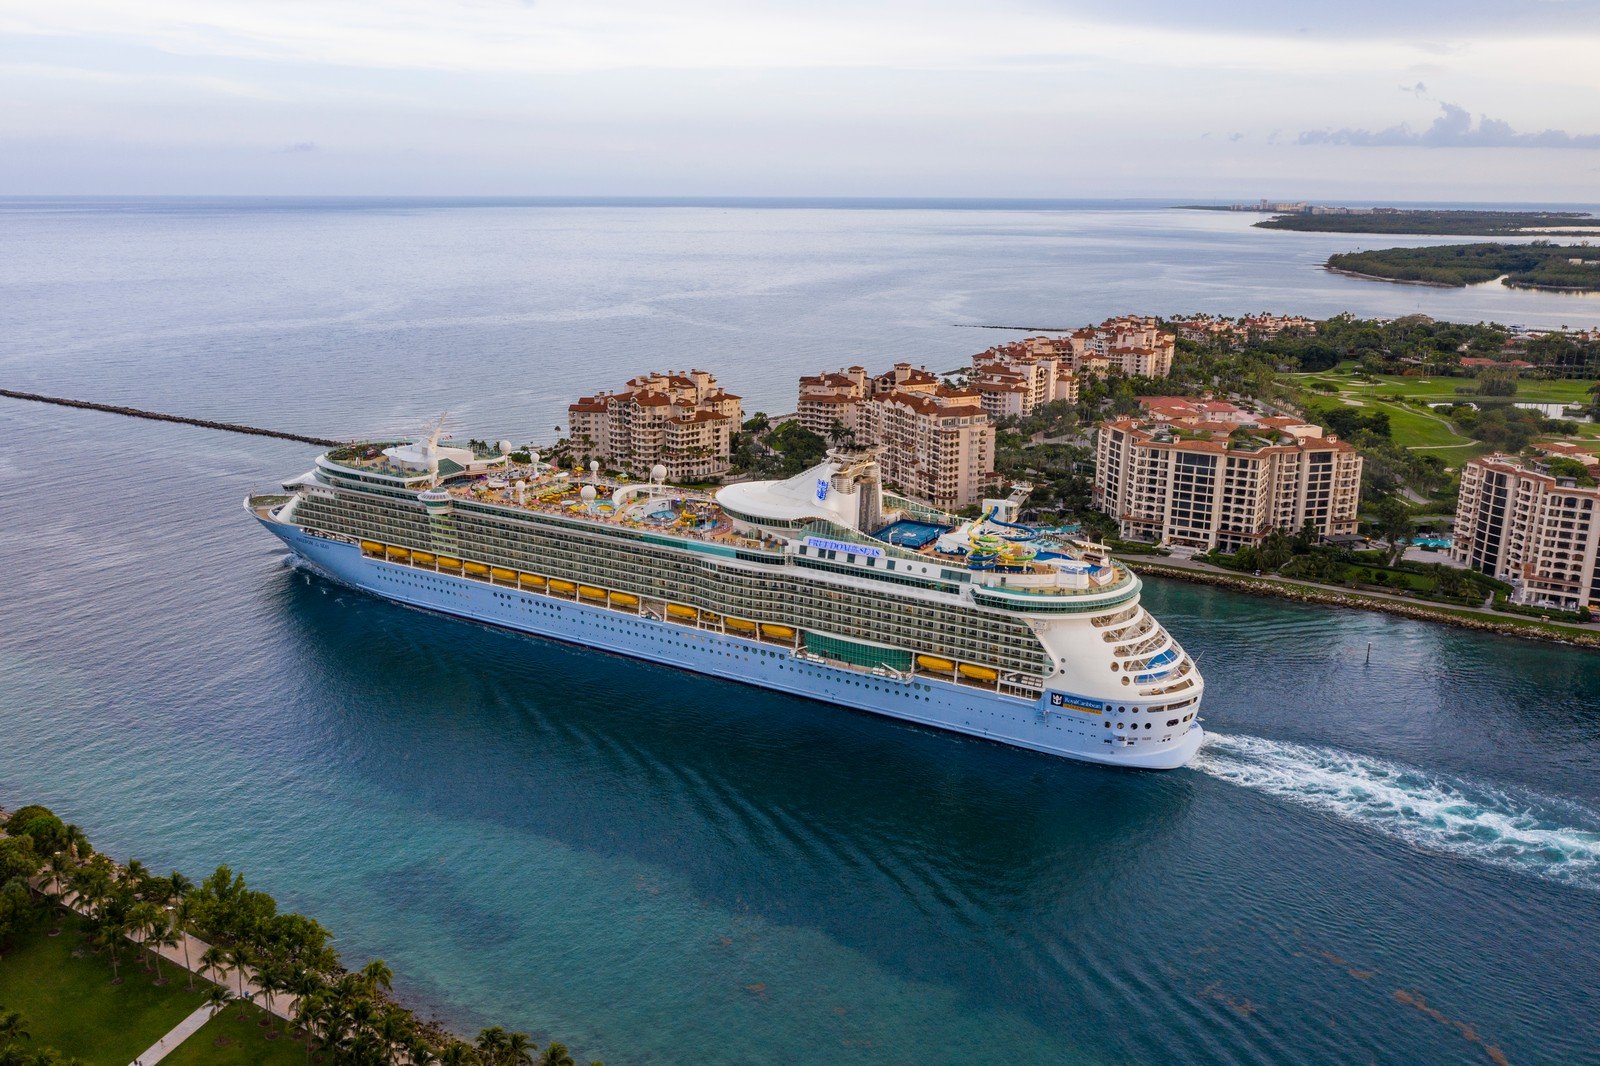 Royal Caribbean will stop offering onboard Covid-19 tests for international passengers returning home | Royal Caribbean Blog